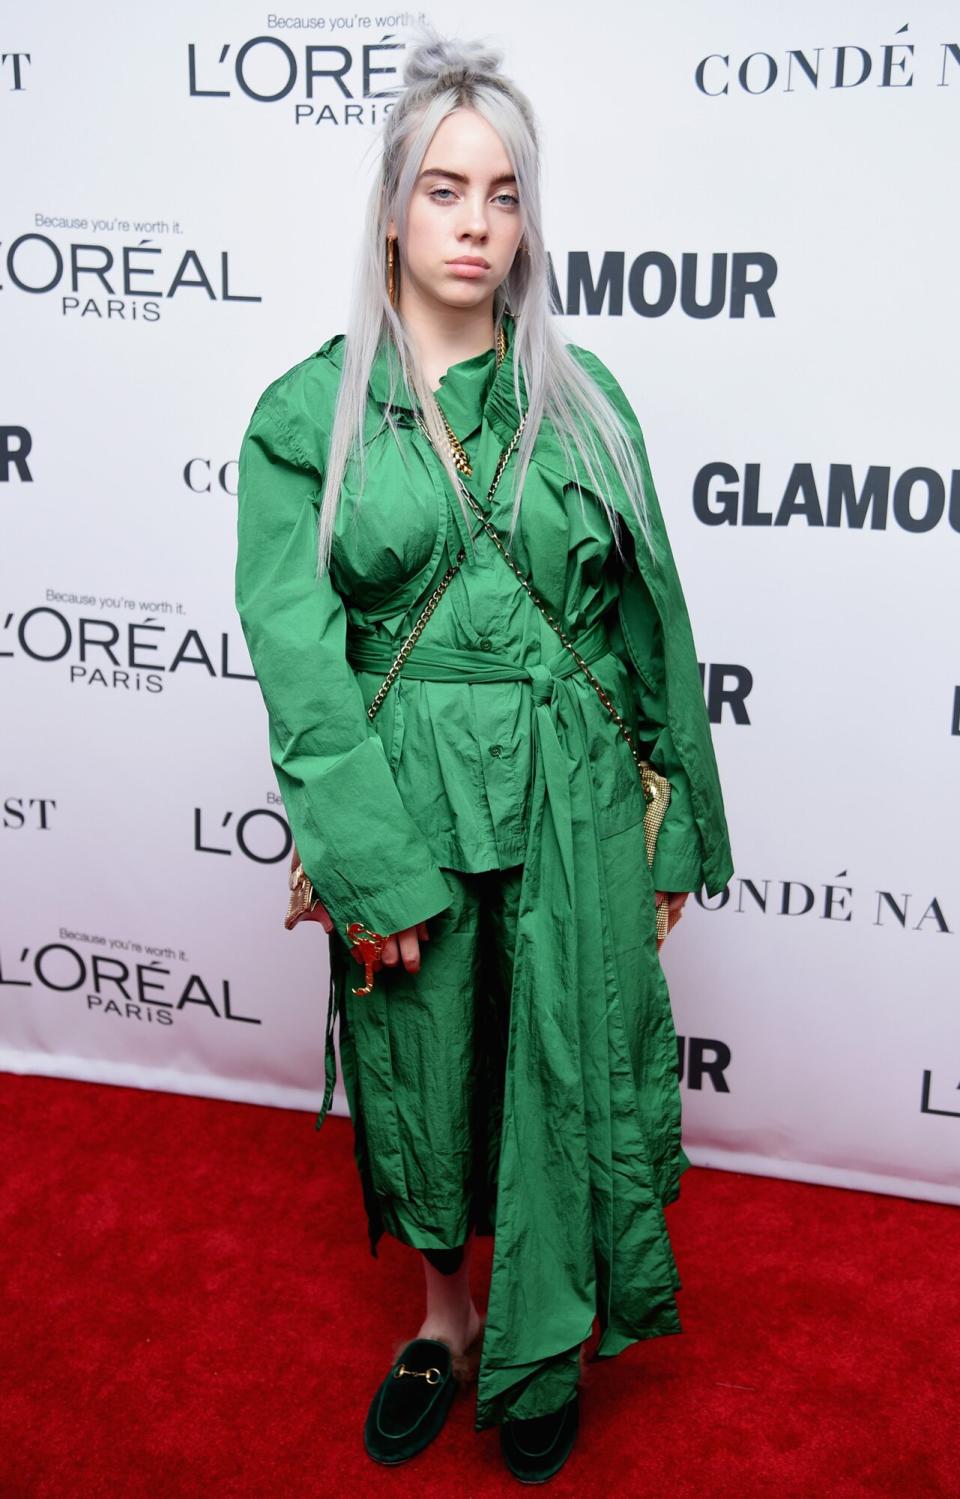 Billie Eilish attends Glamour's 2017 Women of The Year Awards at Kings Theatre on November 13, 2017 in Brooklyn, New York